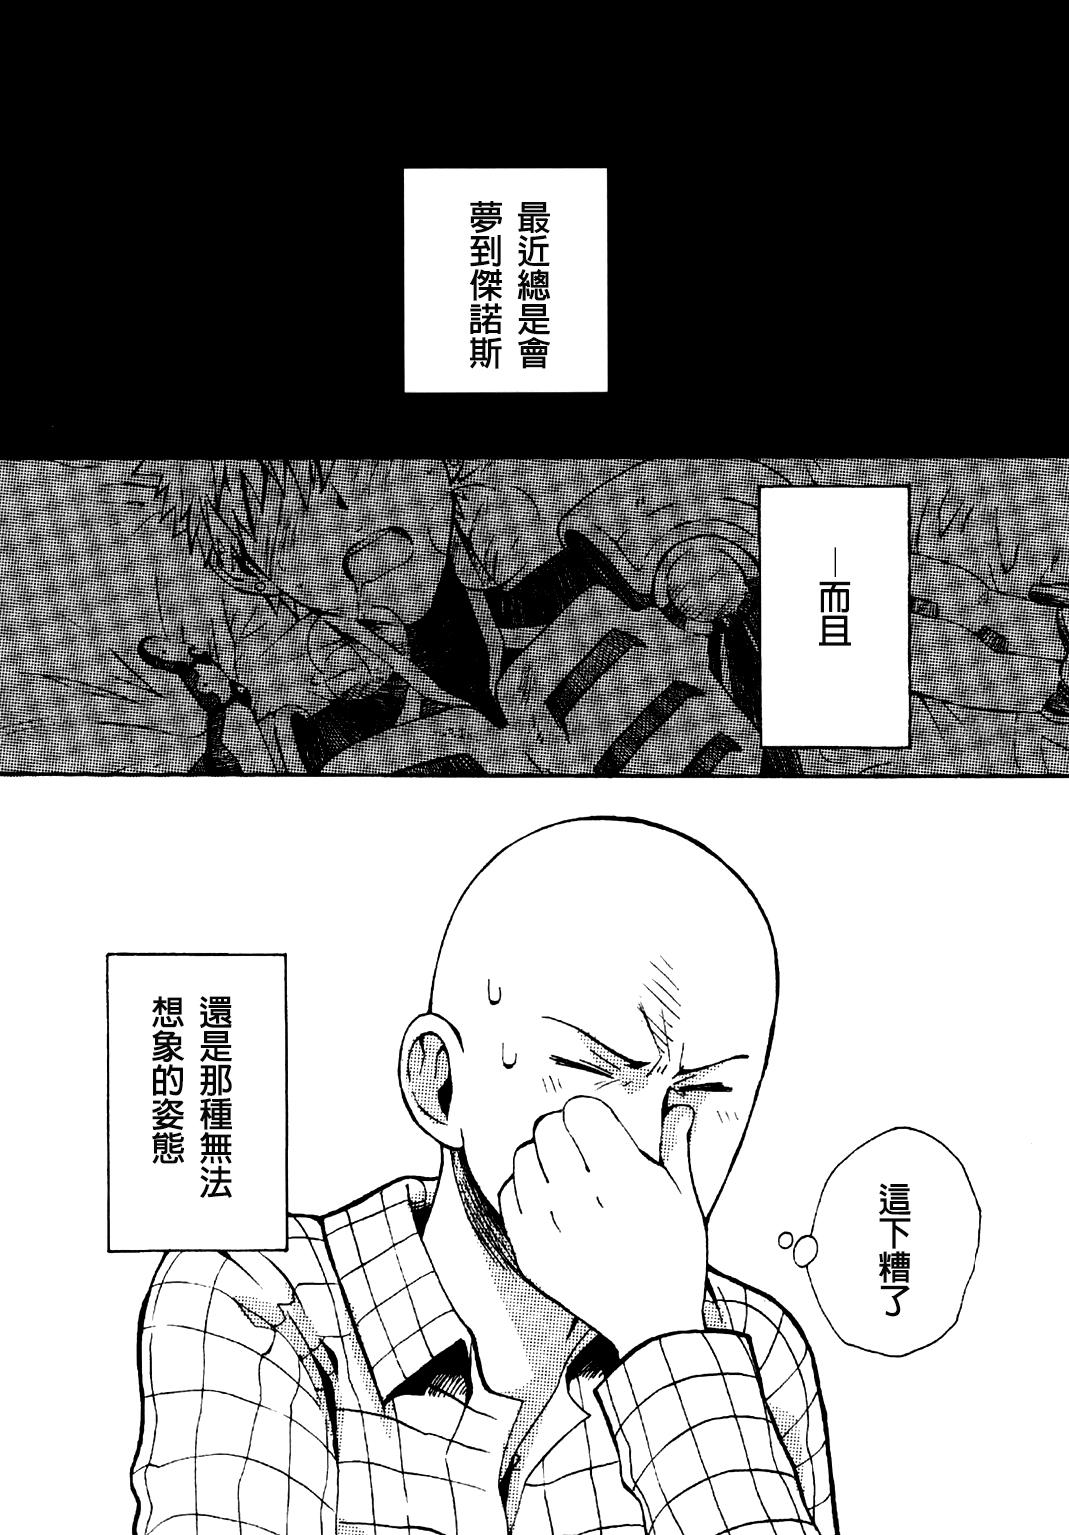 Amature Sex Tapes NATURAL JUNKIE - One punch man Gay Outinpublic - Page 3